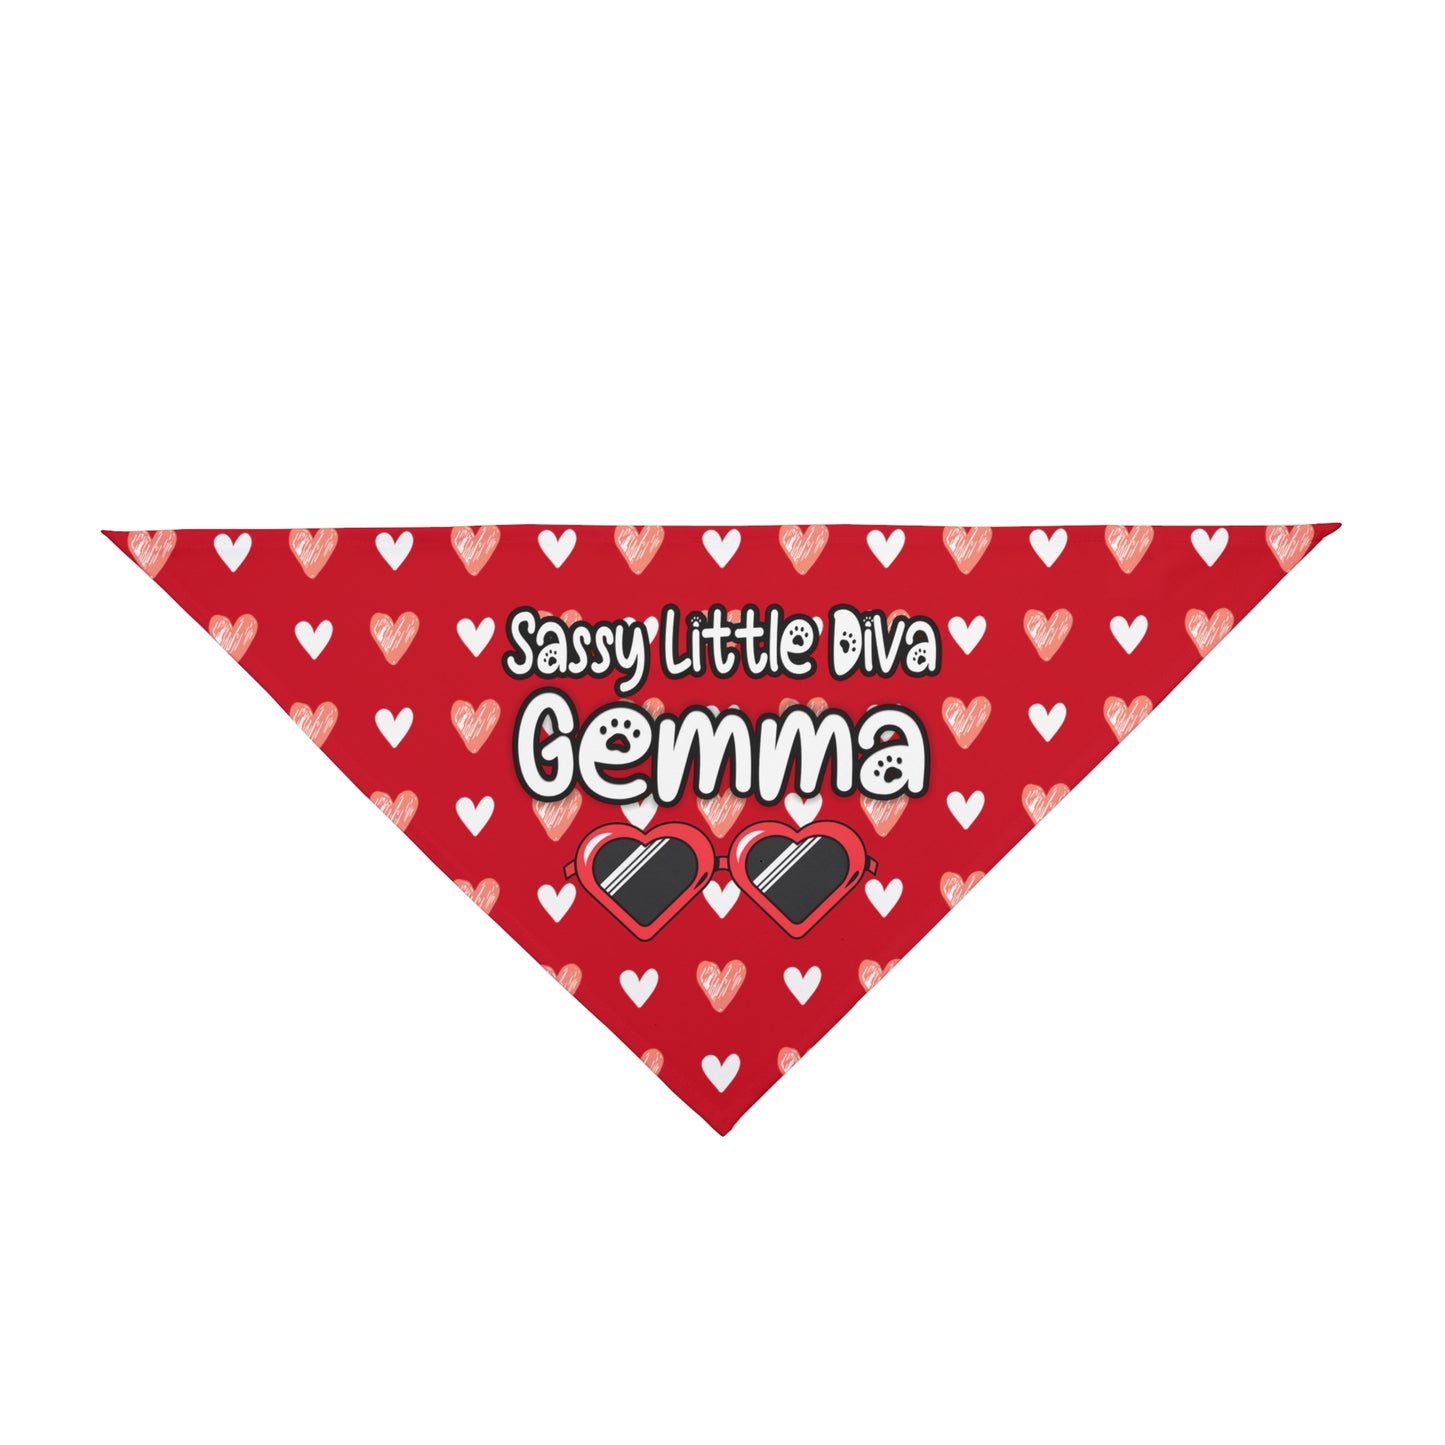 A pet bandana with a beautiful hearts pattern design with a message that says: "Little Diva Gemma" and sun glasses. Bandana's Color is red